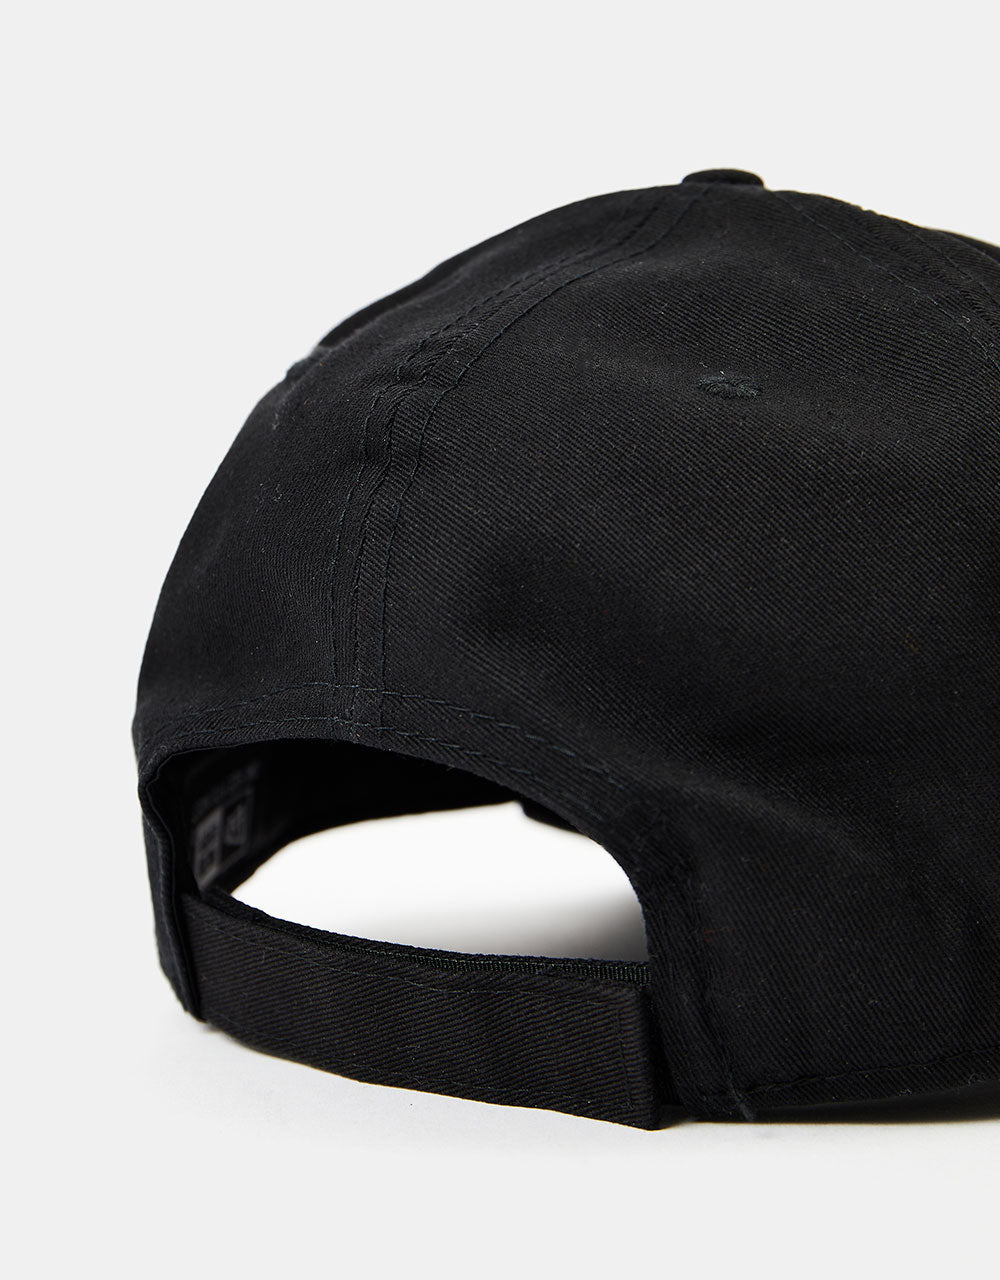 New Era 9Forty Flag Collection Cap - Black/White